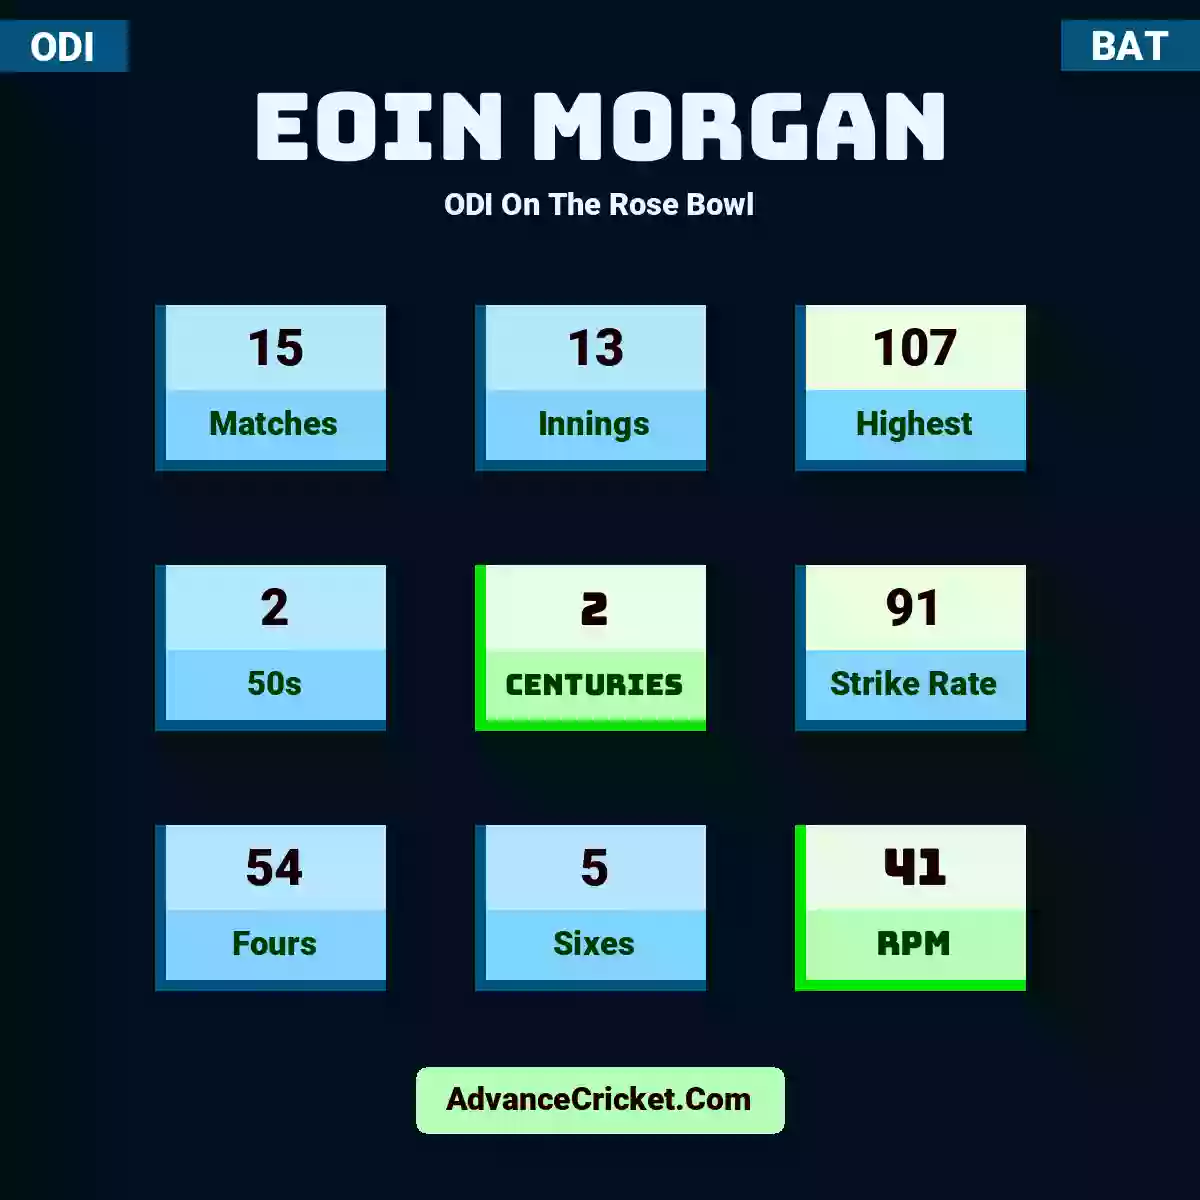 Eoin Morgan ODI  On The Rose Bowl, Eoin Morgan played 15 matches, scored 107 runs as highest, 2 half-centuries, and 2 centuries, with a strike rate of 91. E.Morgan hit 54 fours and 5 sixes, with an RPM of 41.